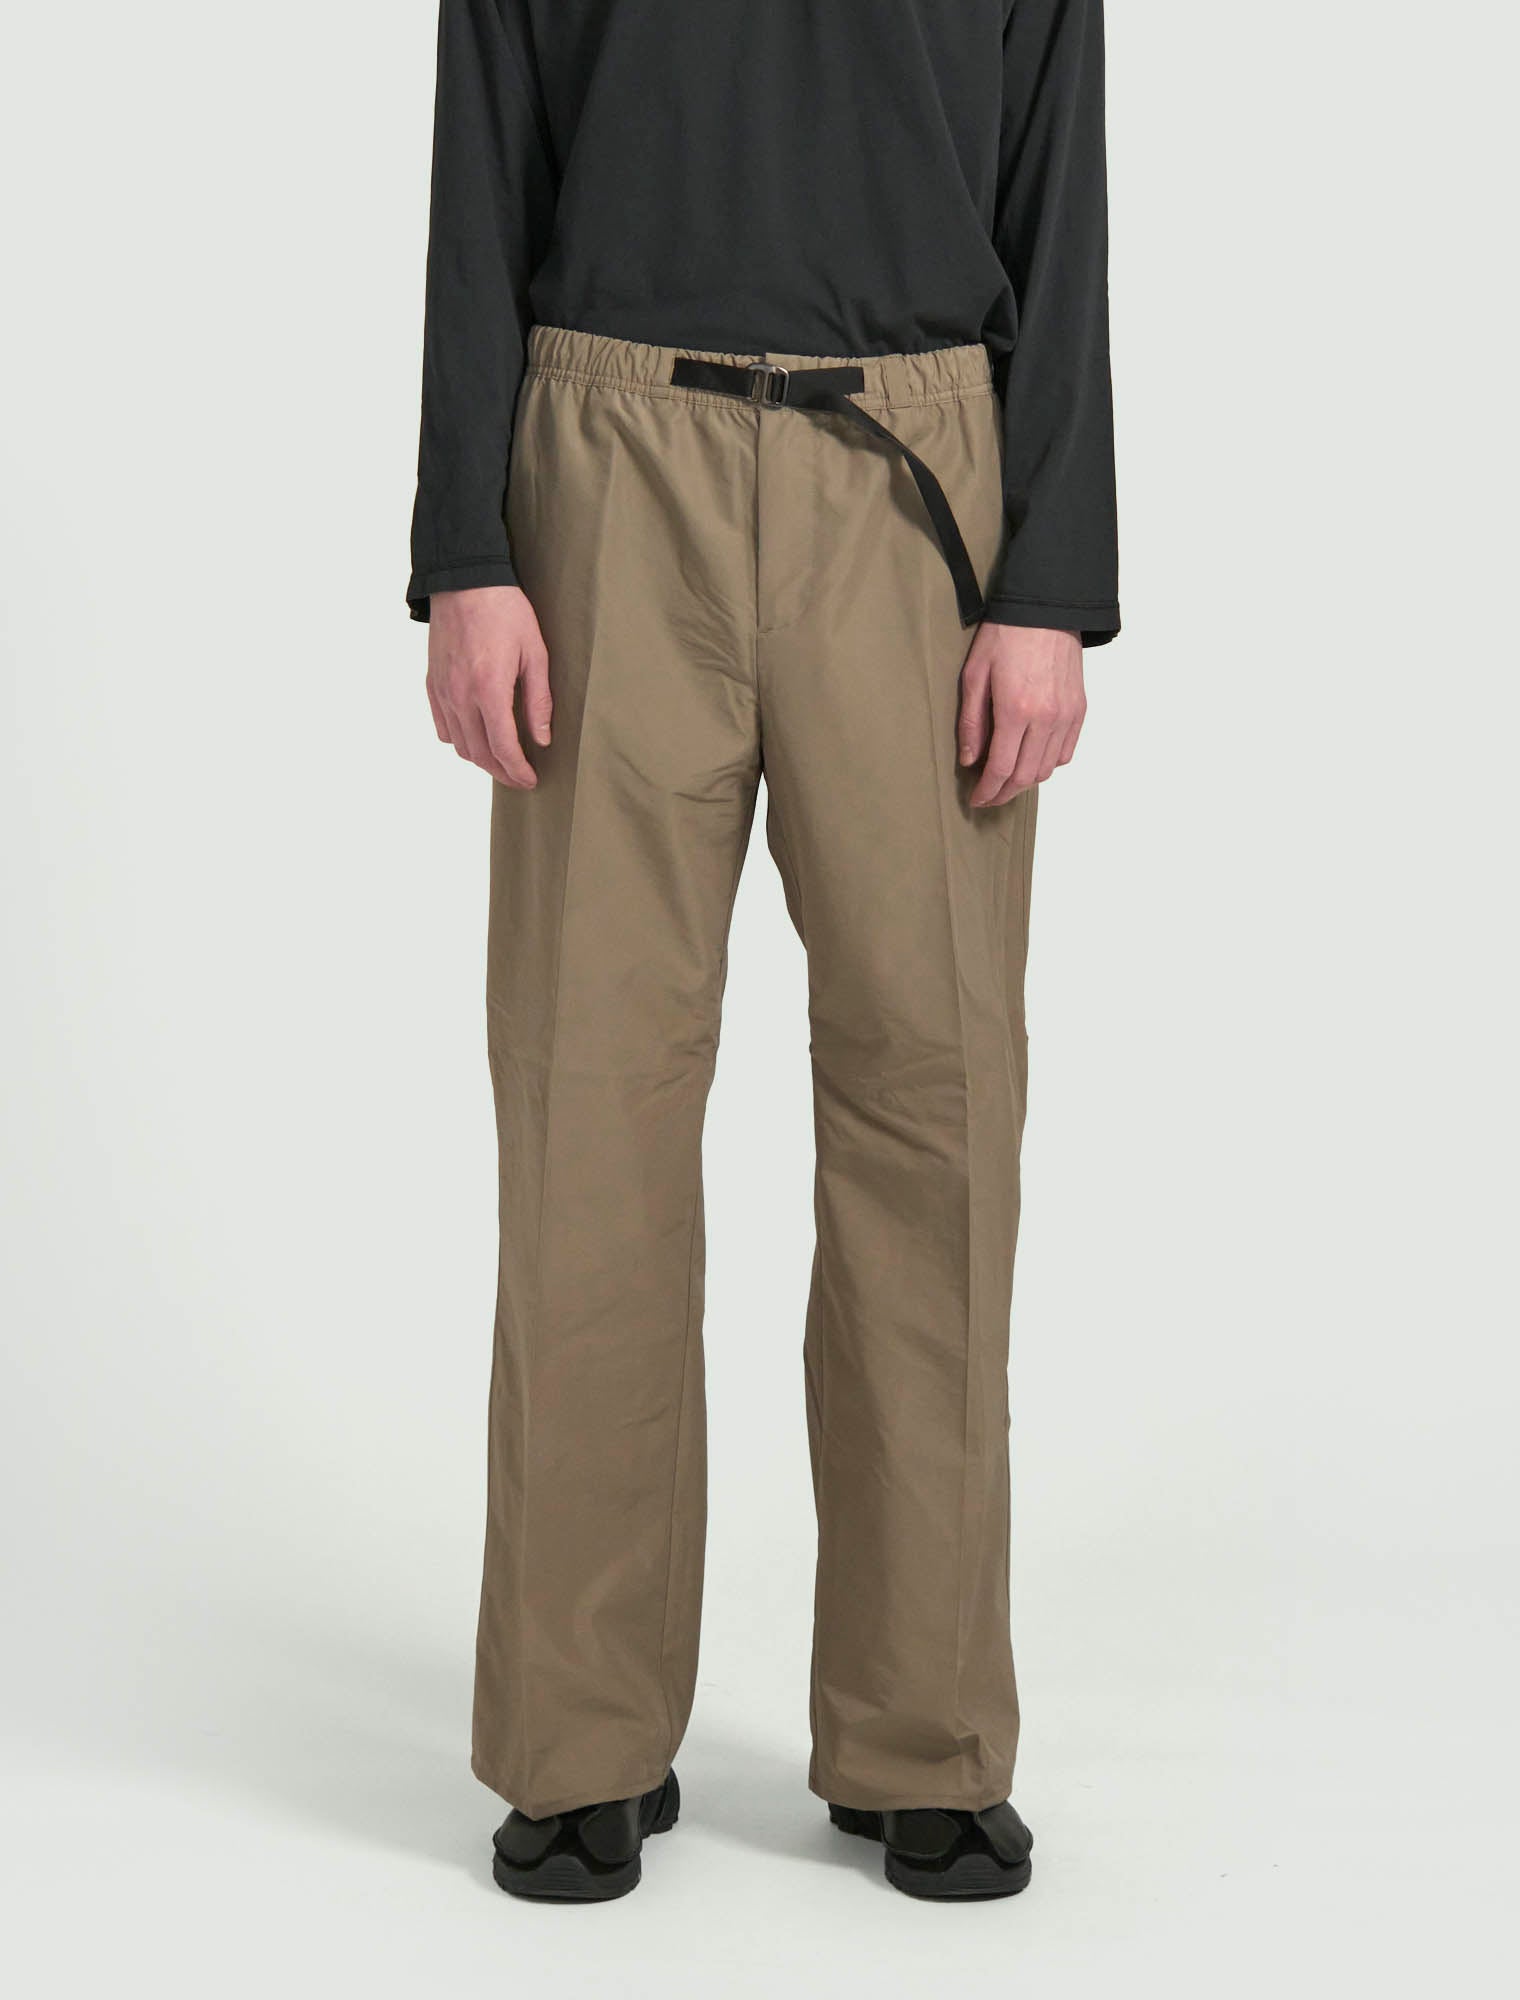 Wander Trousers - Taupe Grace Nylon